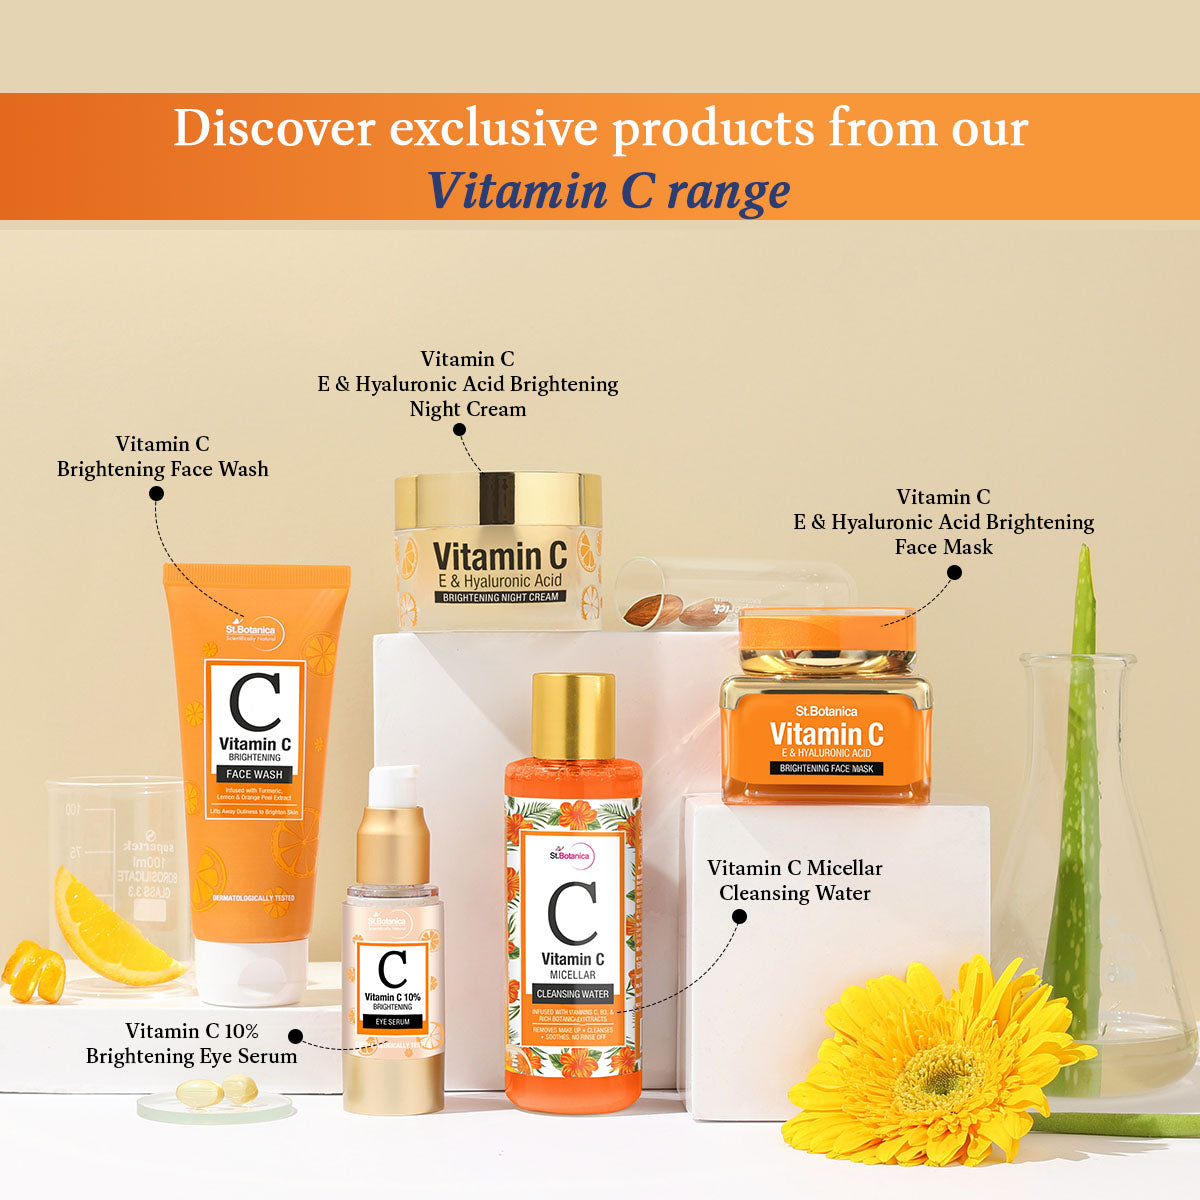 St.Botanica Vitamin C SPF 30 Pa+++ Sunscreen Oil Mineral Based and Water Resistant, UVA and UVB Protection, 120 ml